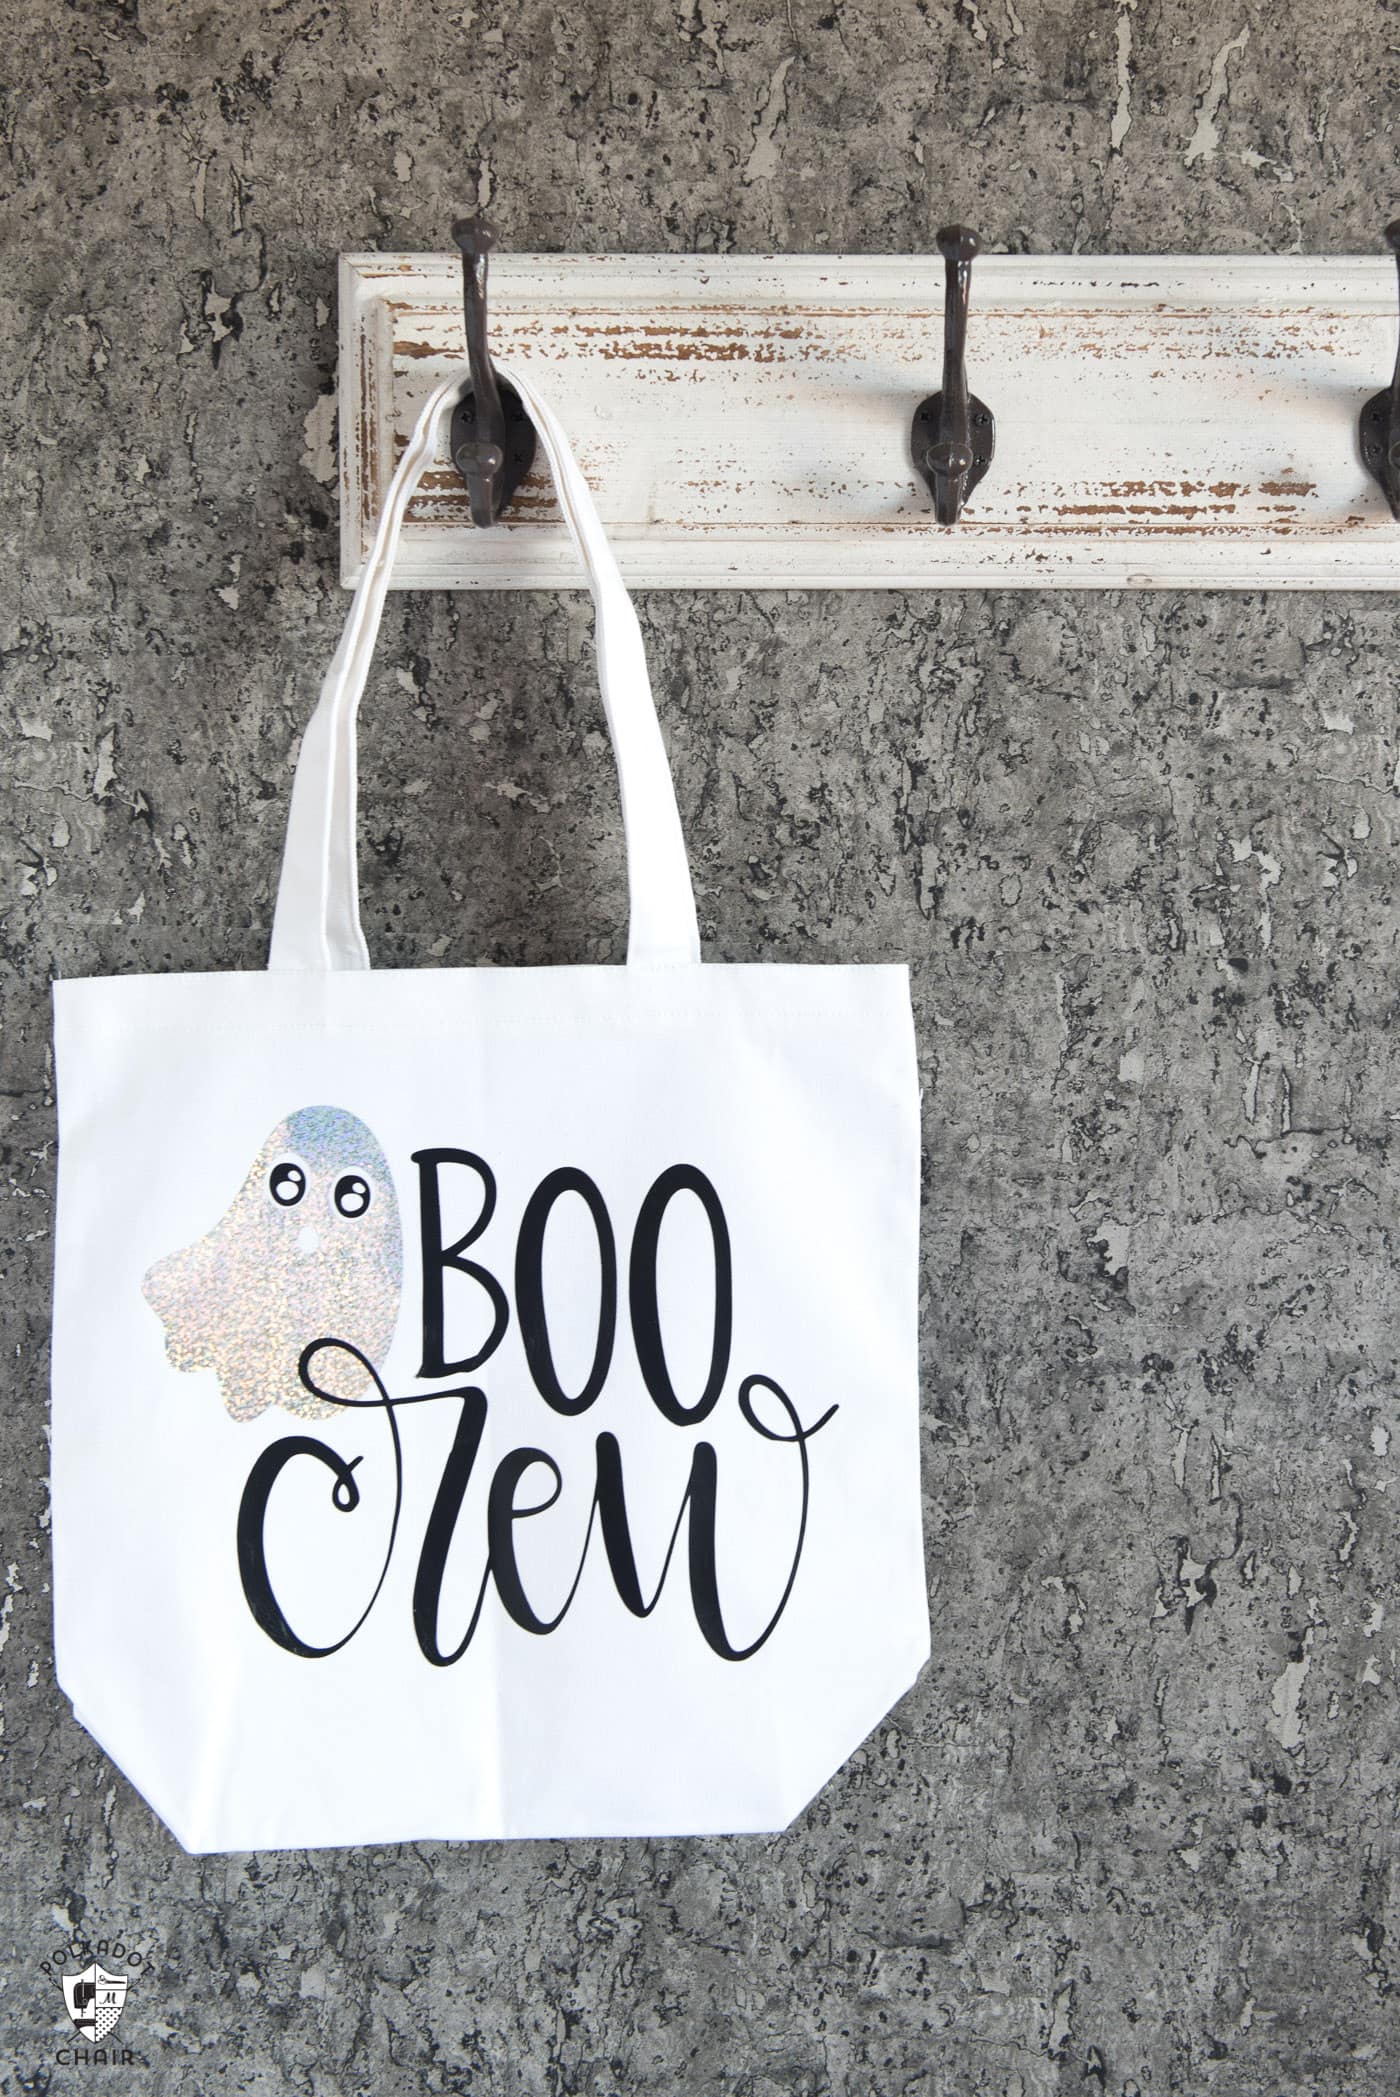 Download DIY Trick or Treat Bags and Free Cricut Halloween SVG Files